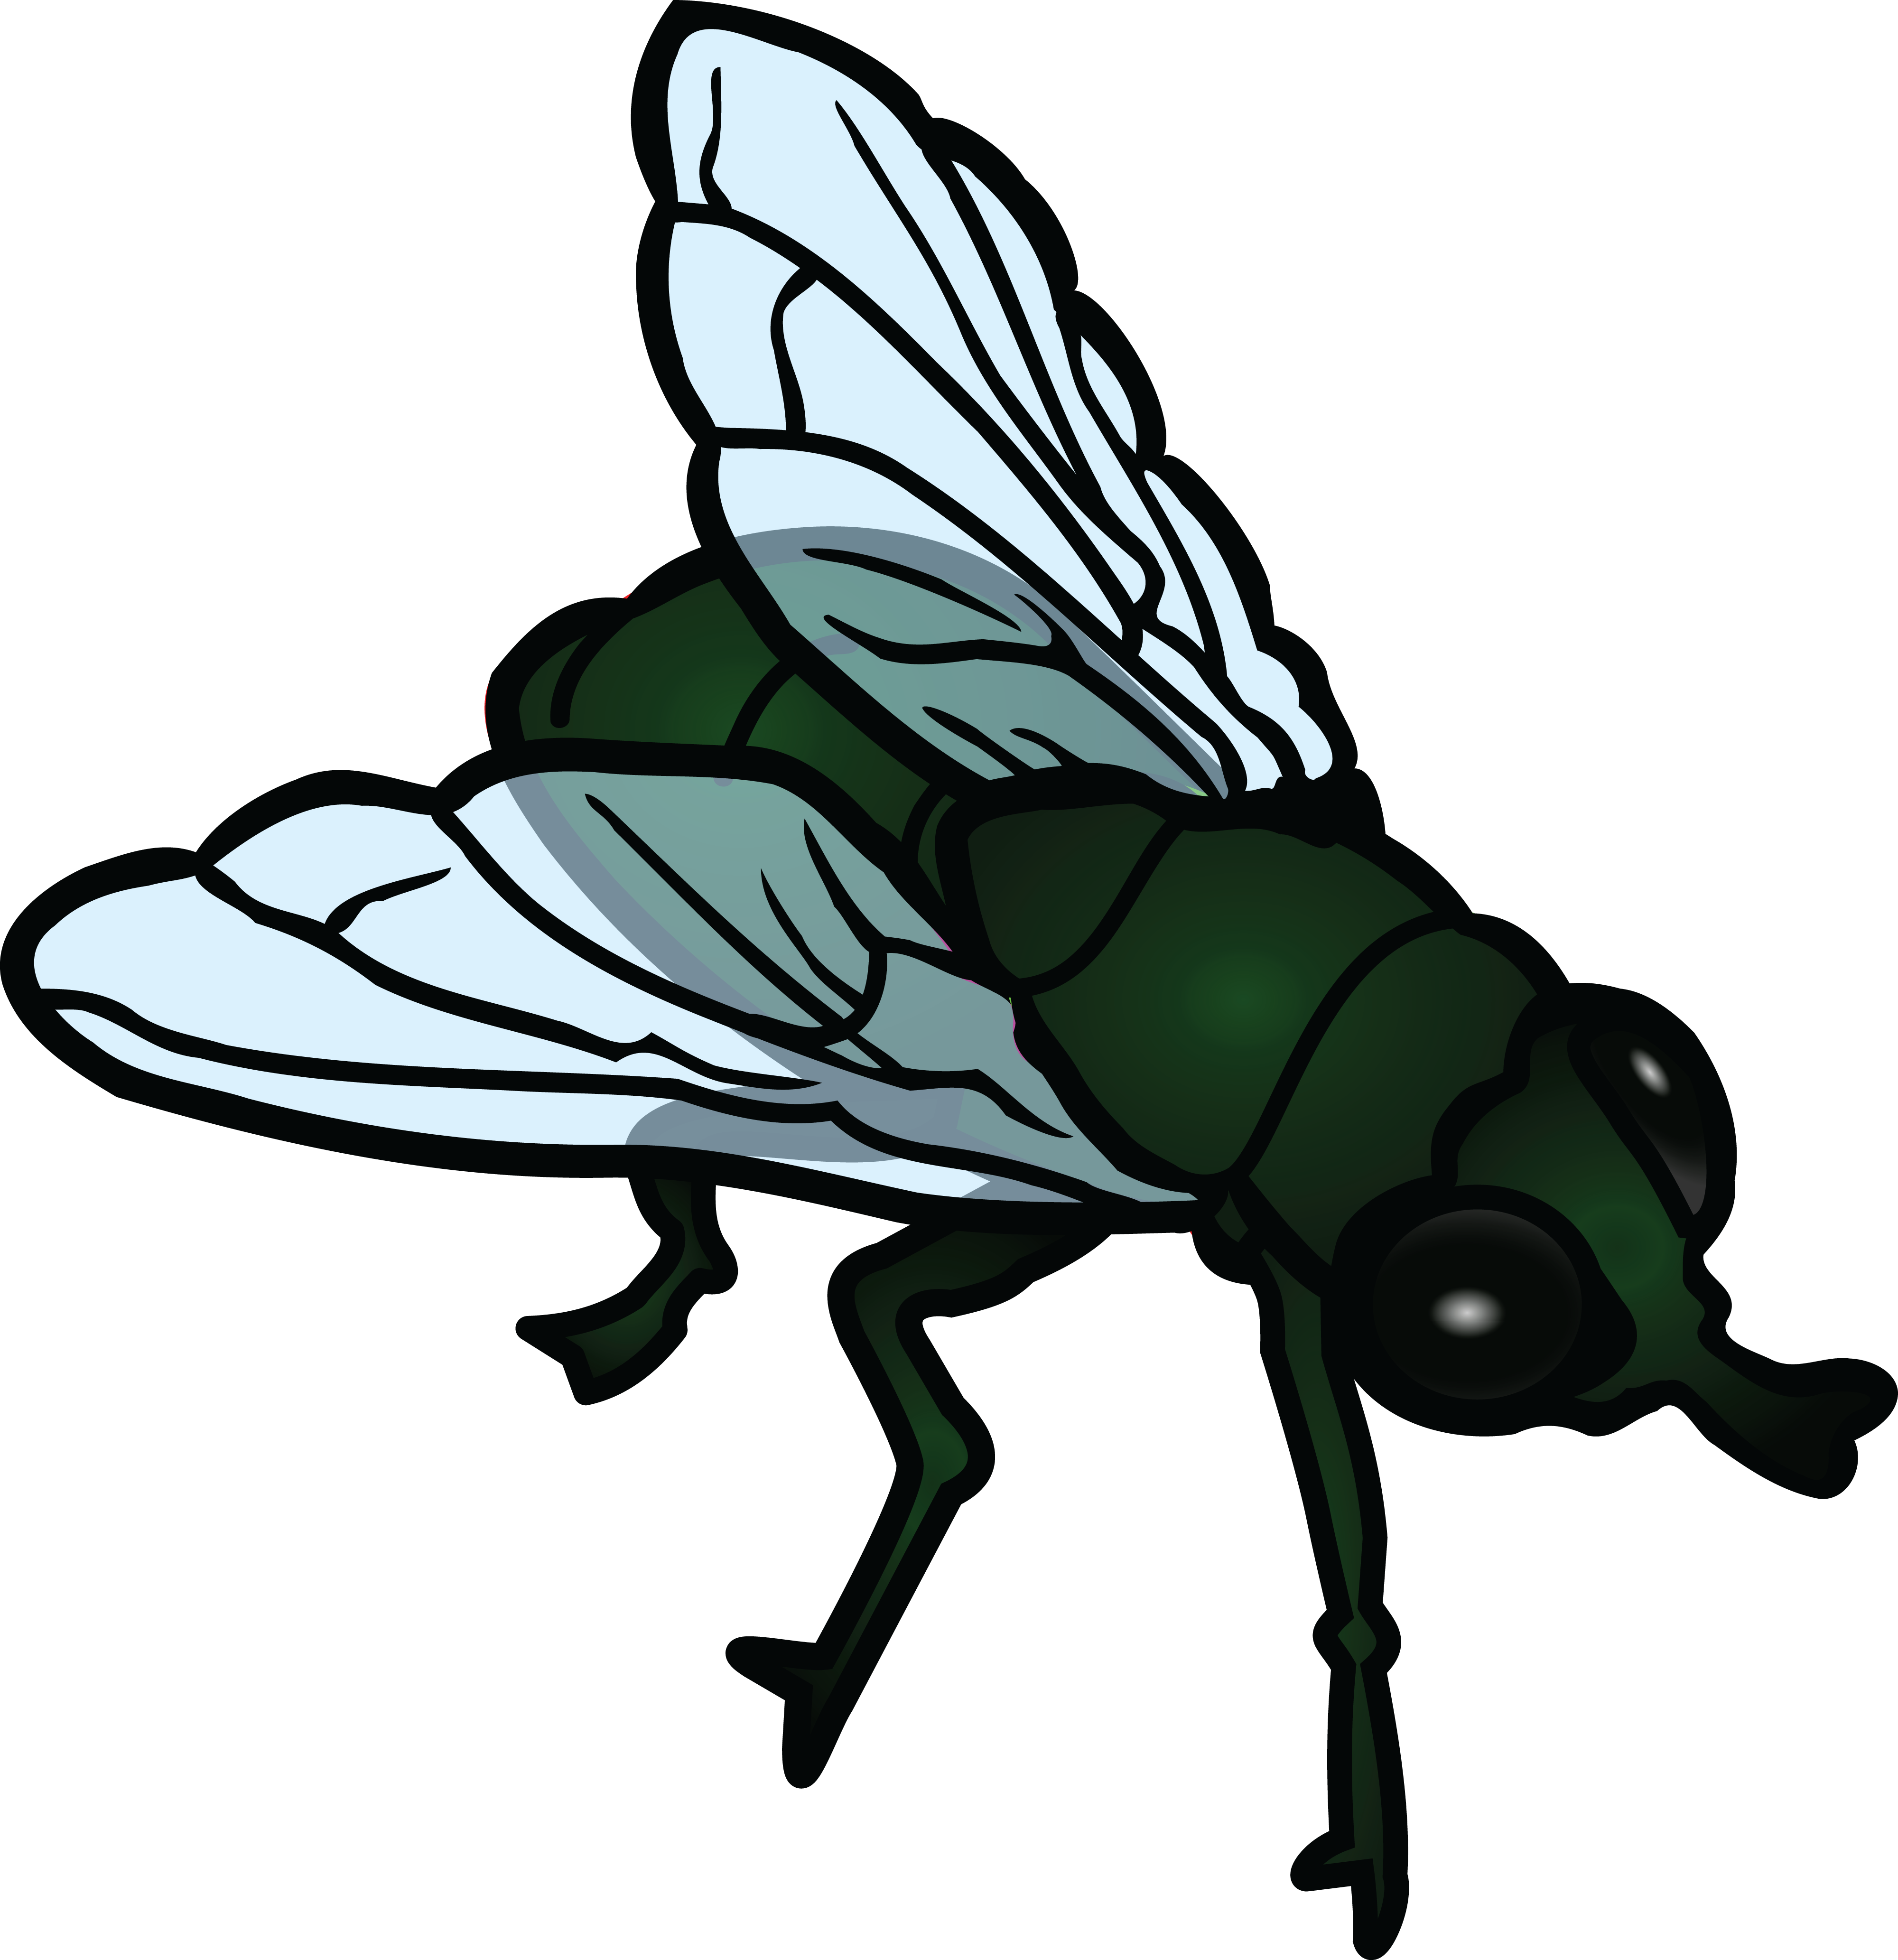 Free Clipart Of A fly #00011377 .